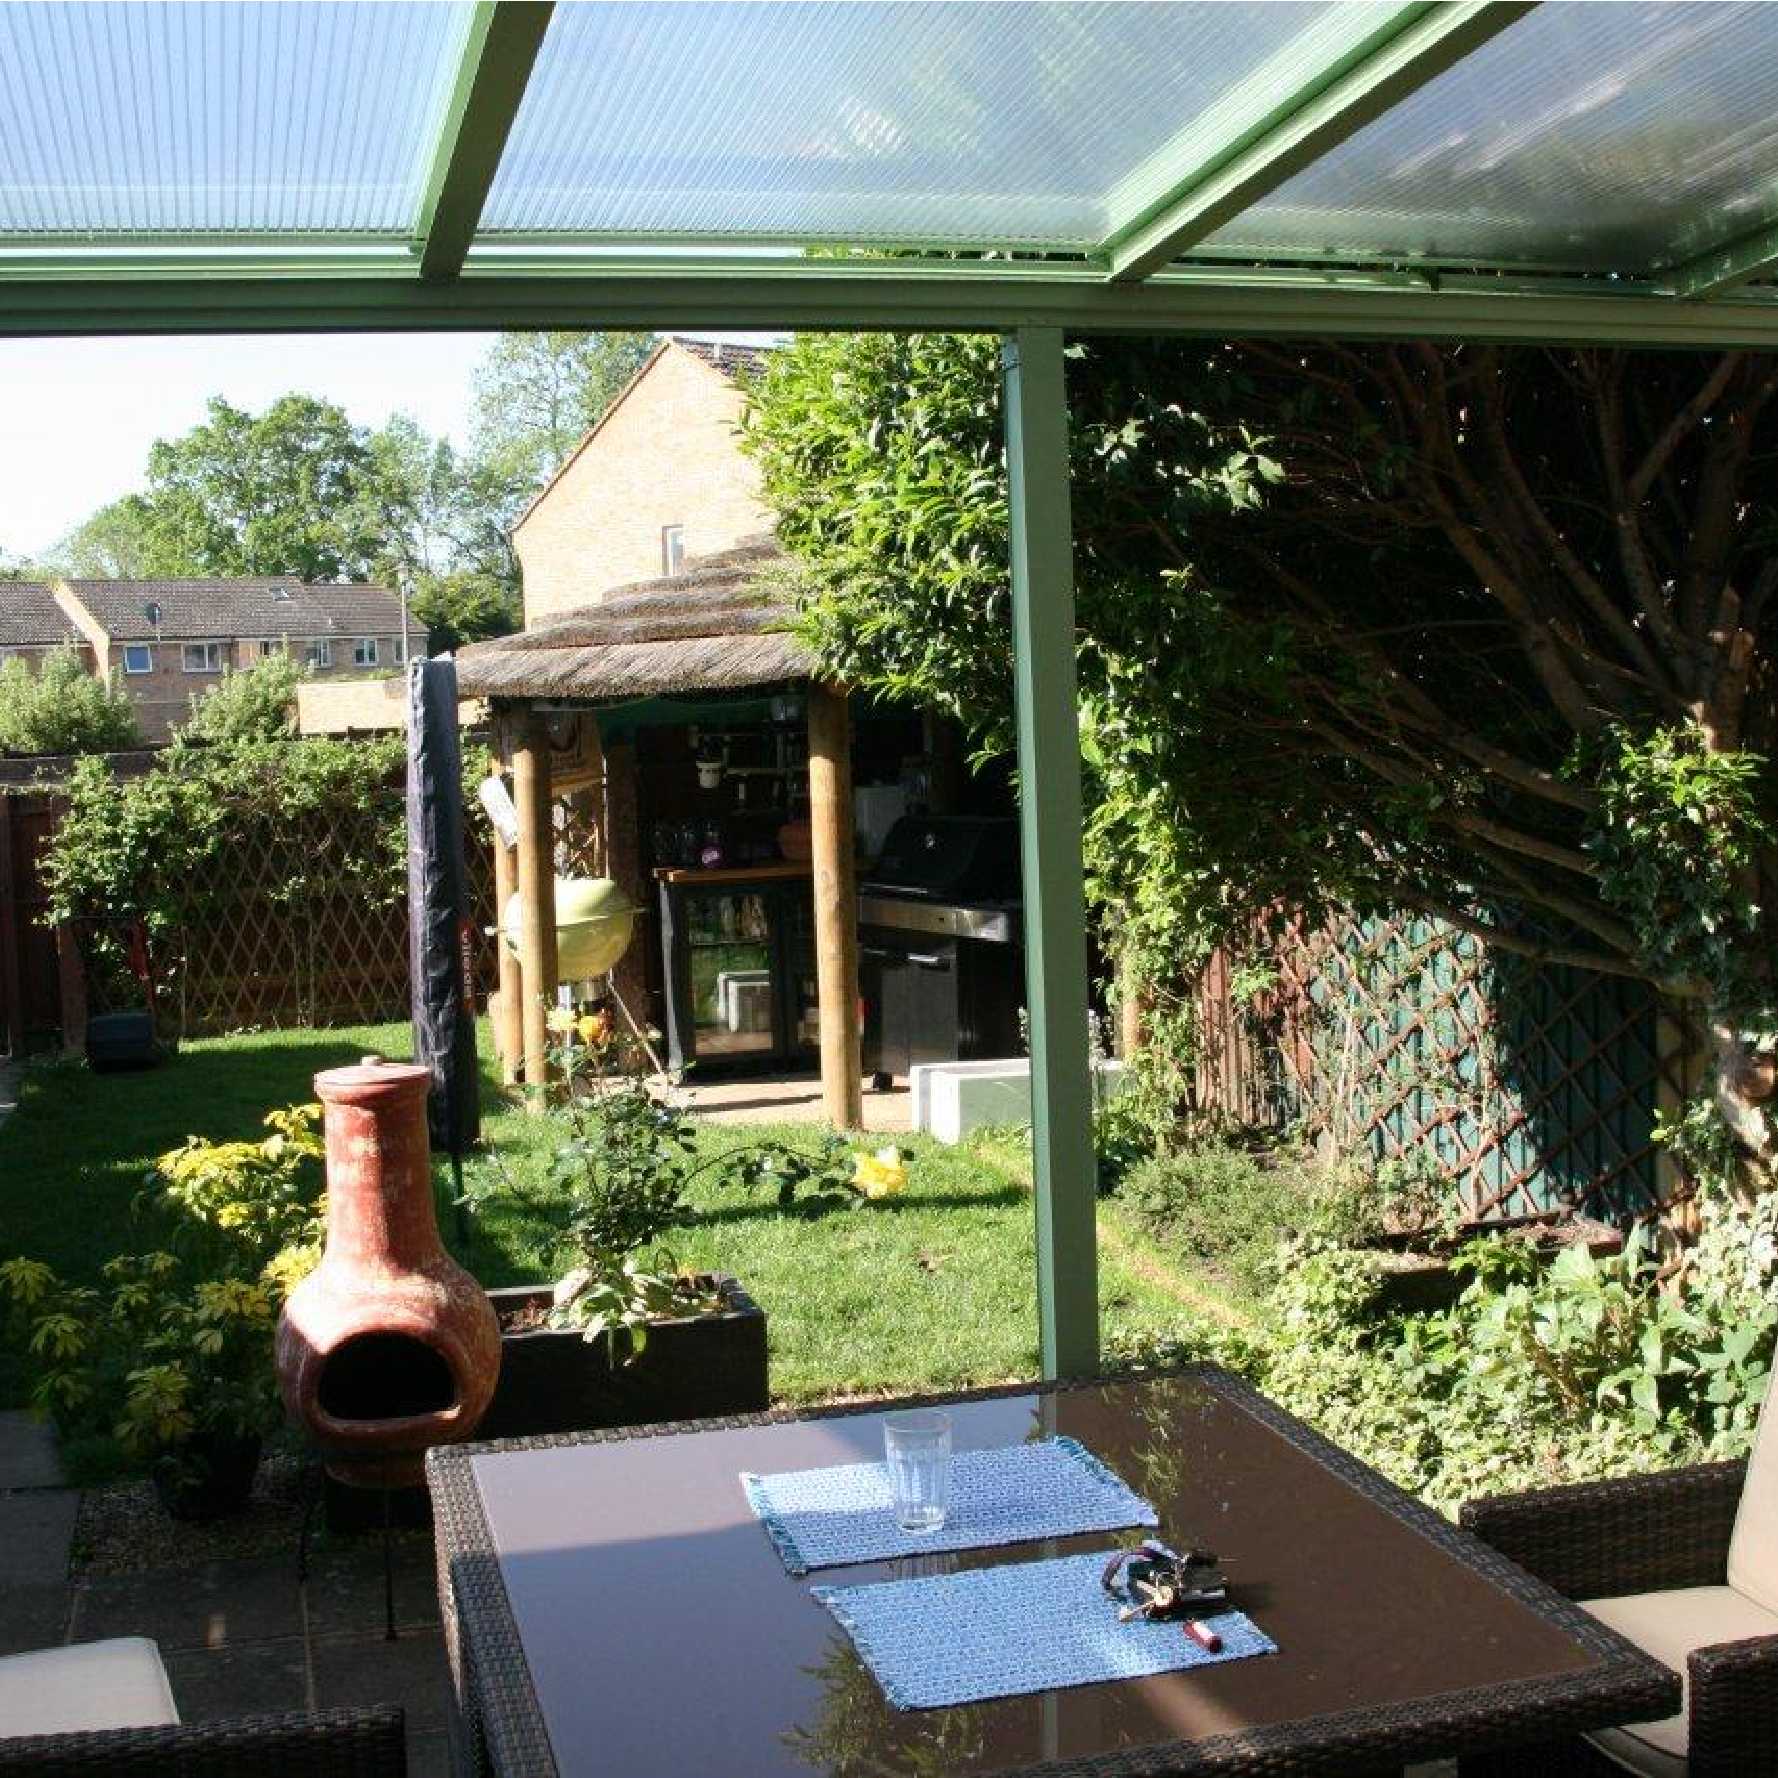 Affordable Omega Smart Lean-To Canopy, White with 16mm Polycarbonate Glazing - 12.0m (W) x 2.5m (P), (5) Supporting Posts